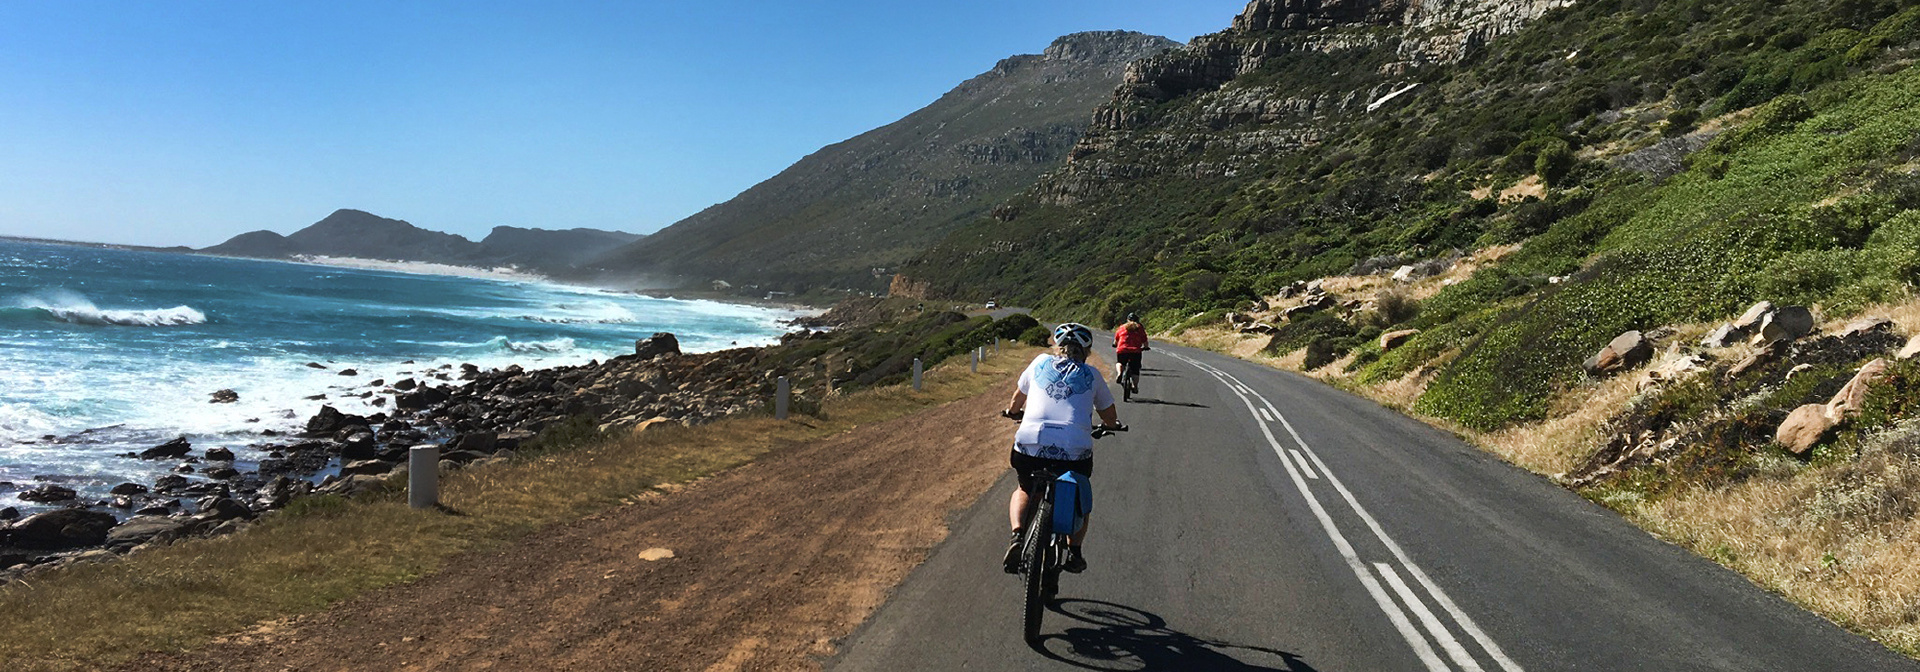 South Africa: Garden Route to Cape Town